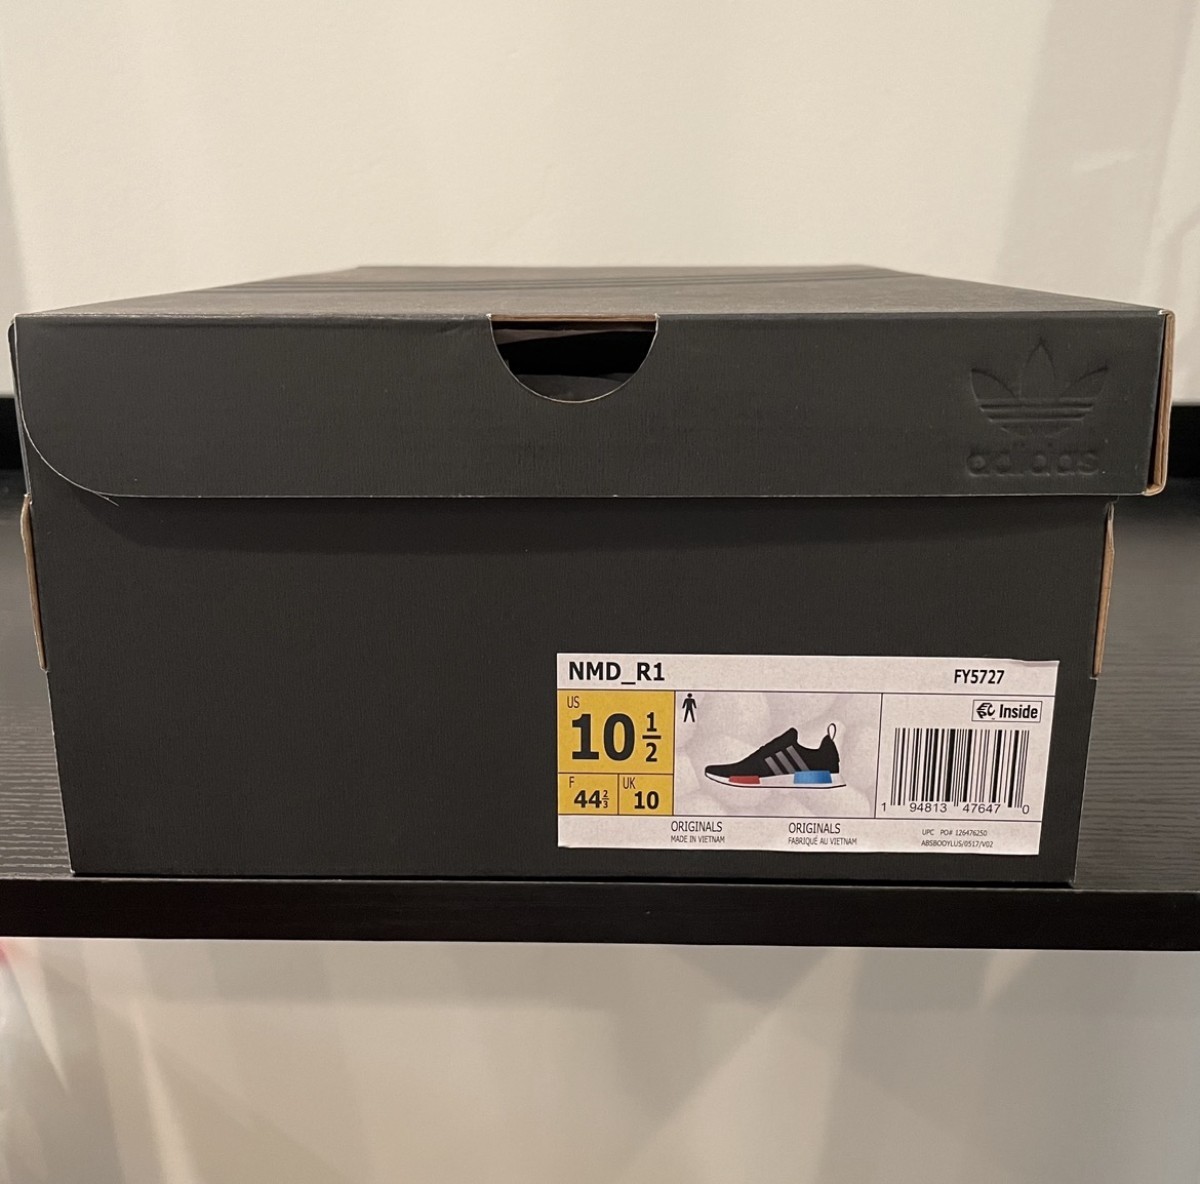 NMD R1 size 10.5 - 2